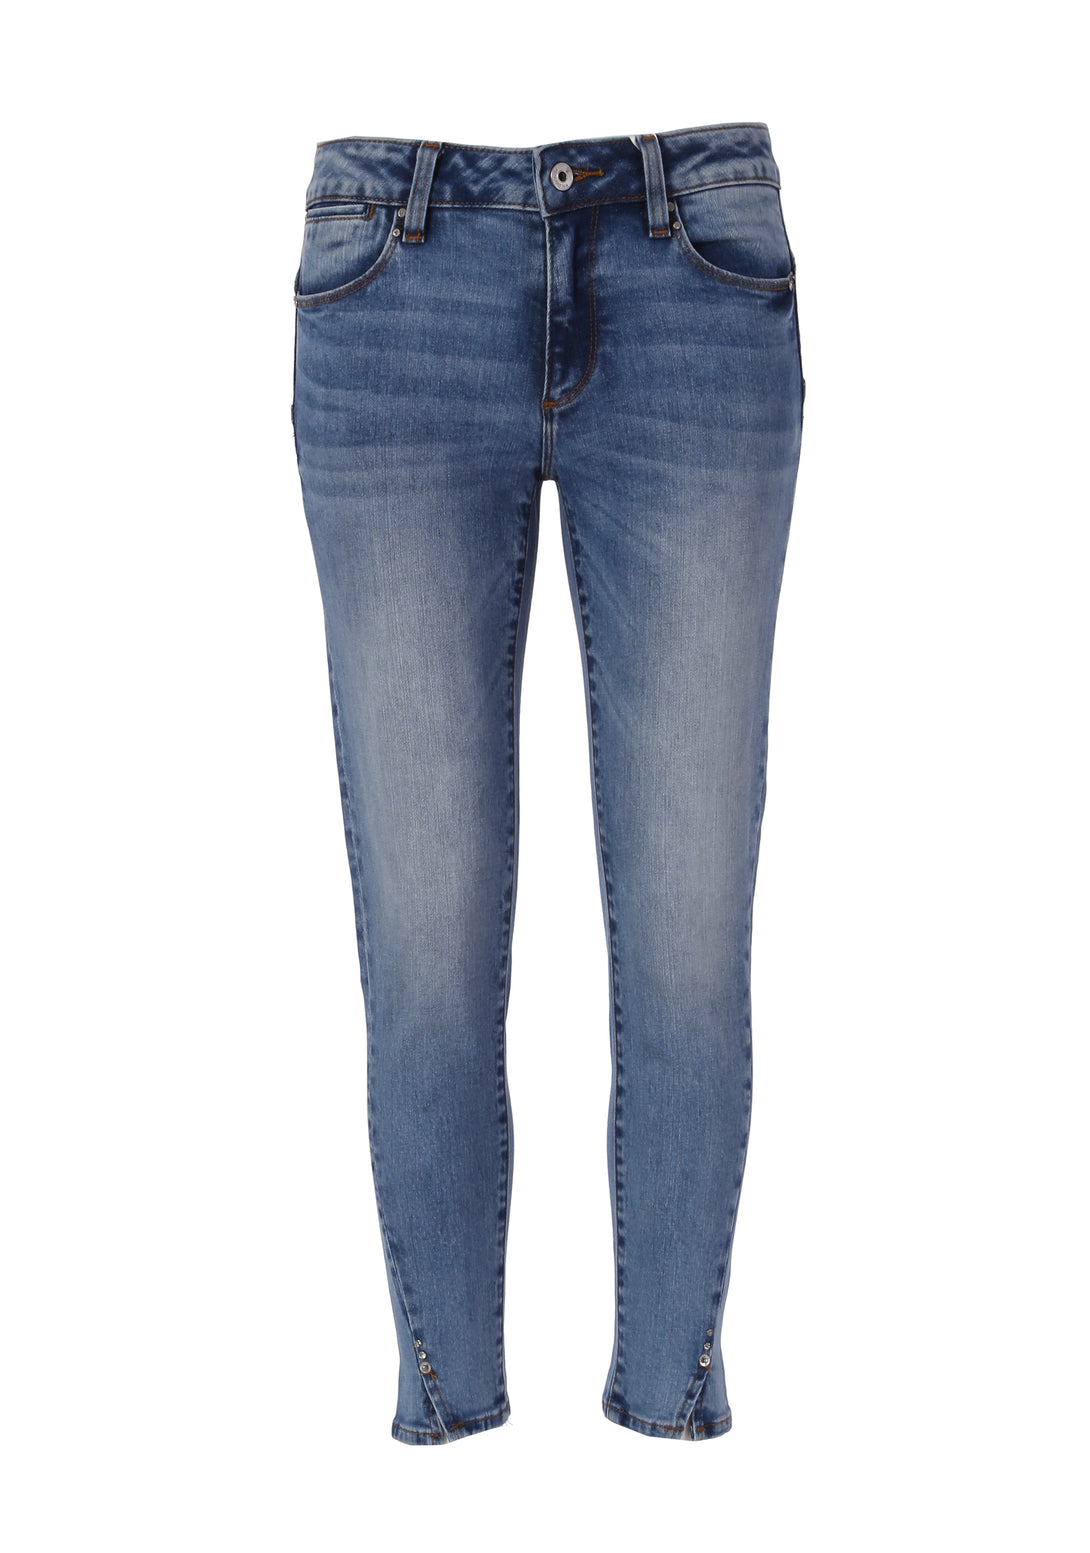 Jeans skinny effetto push up in denim con lavaggio bleached FR24SV9002D401G1 Fracomina